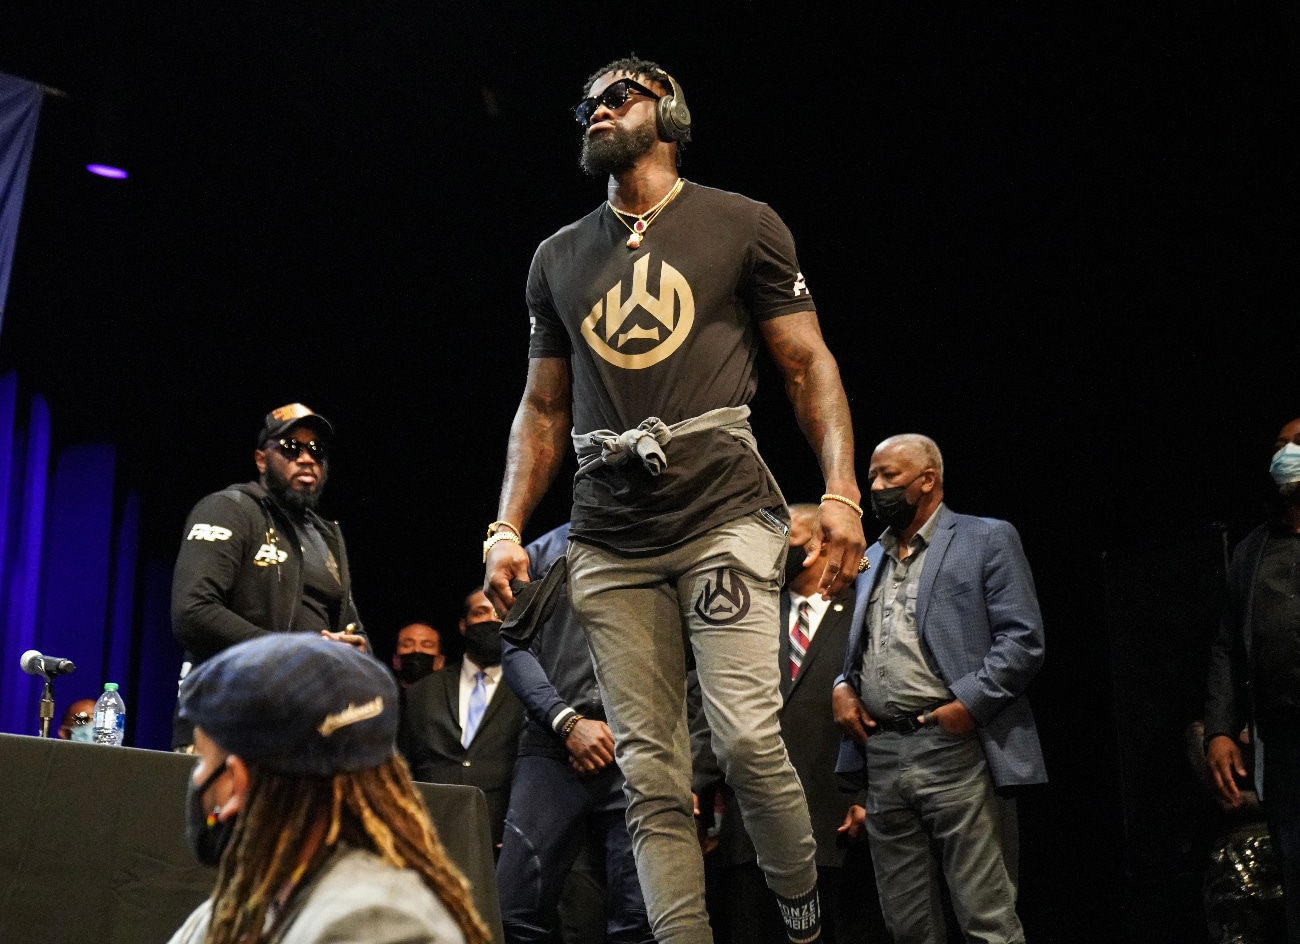 Image: Deontay Wilder looks ready for war